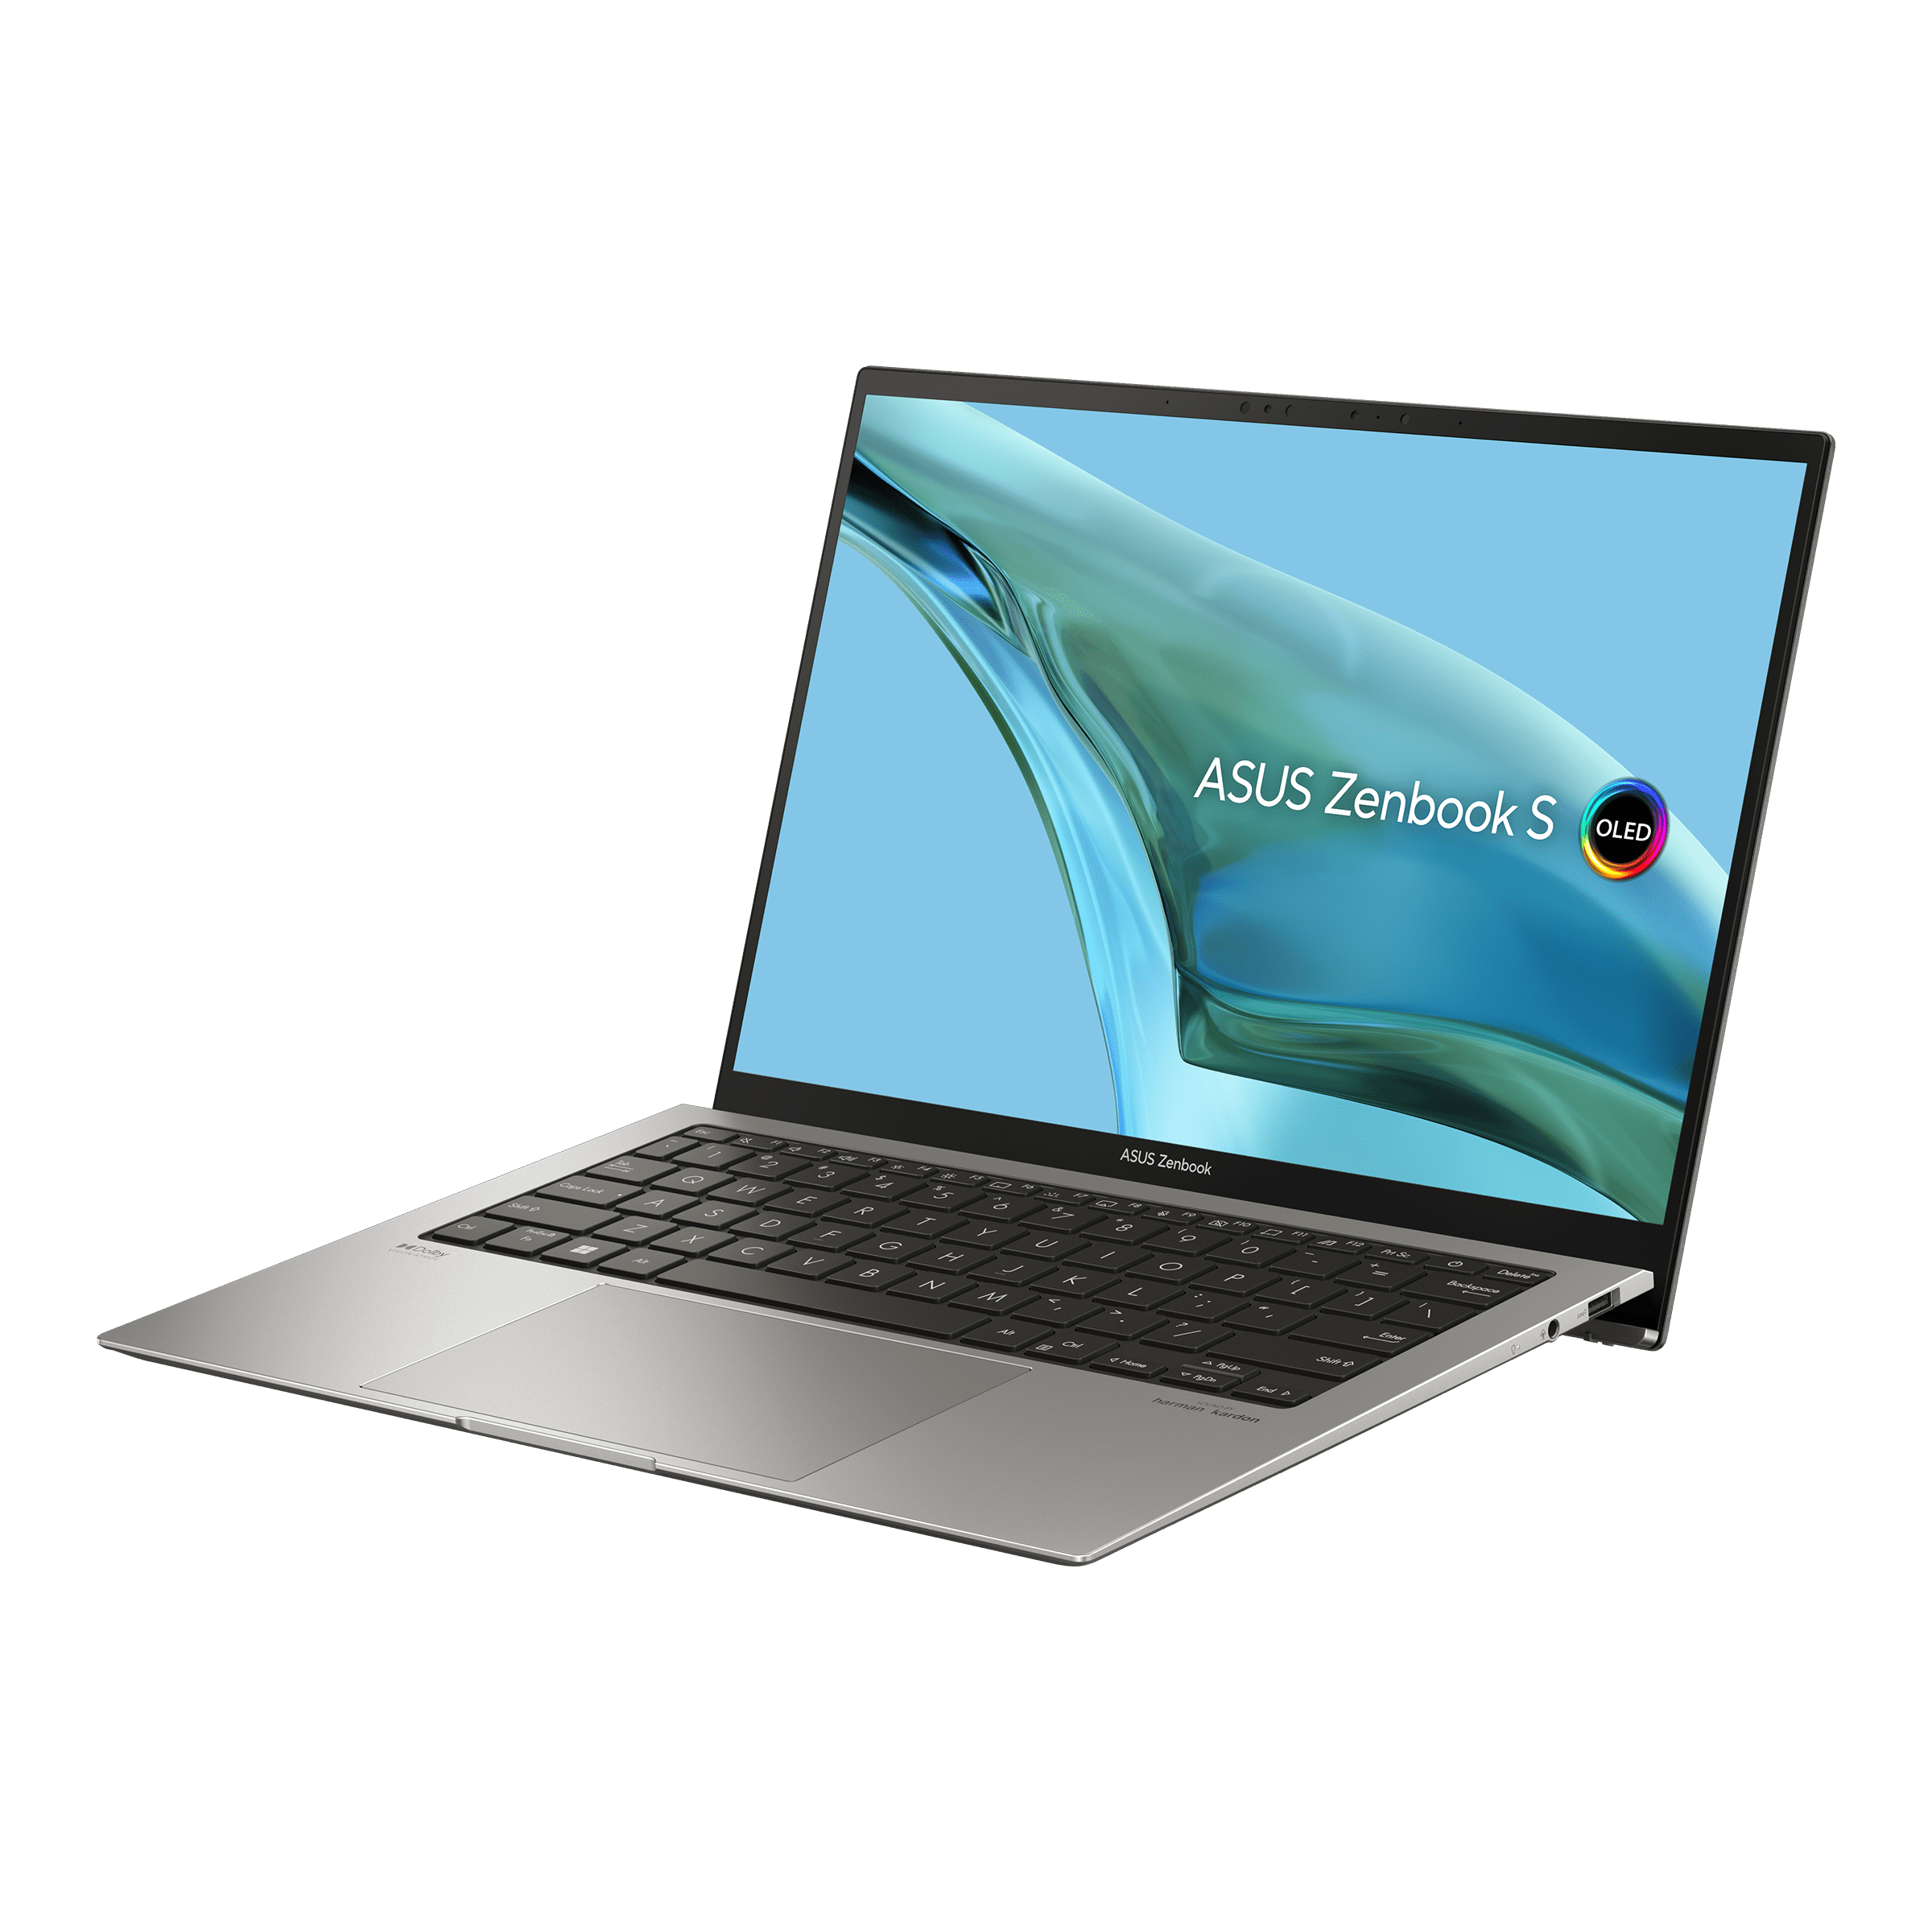 ASUS Zenbook S 13 OLED (UX5304)｜Laptops For Home｜ASUS USA